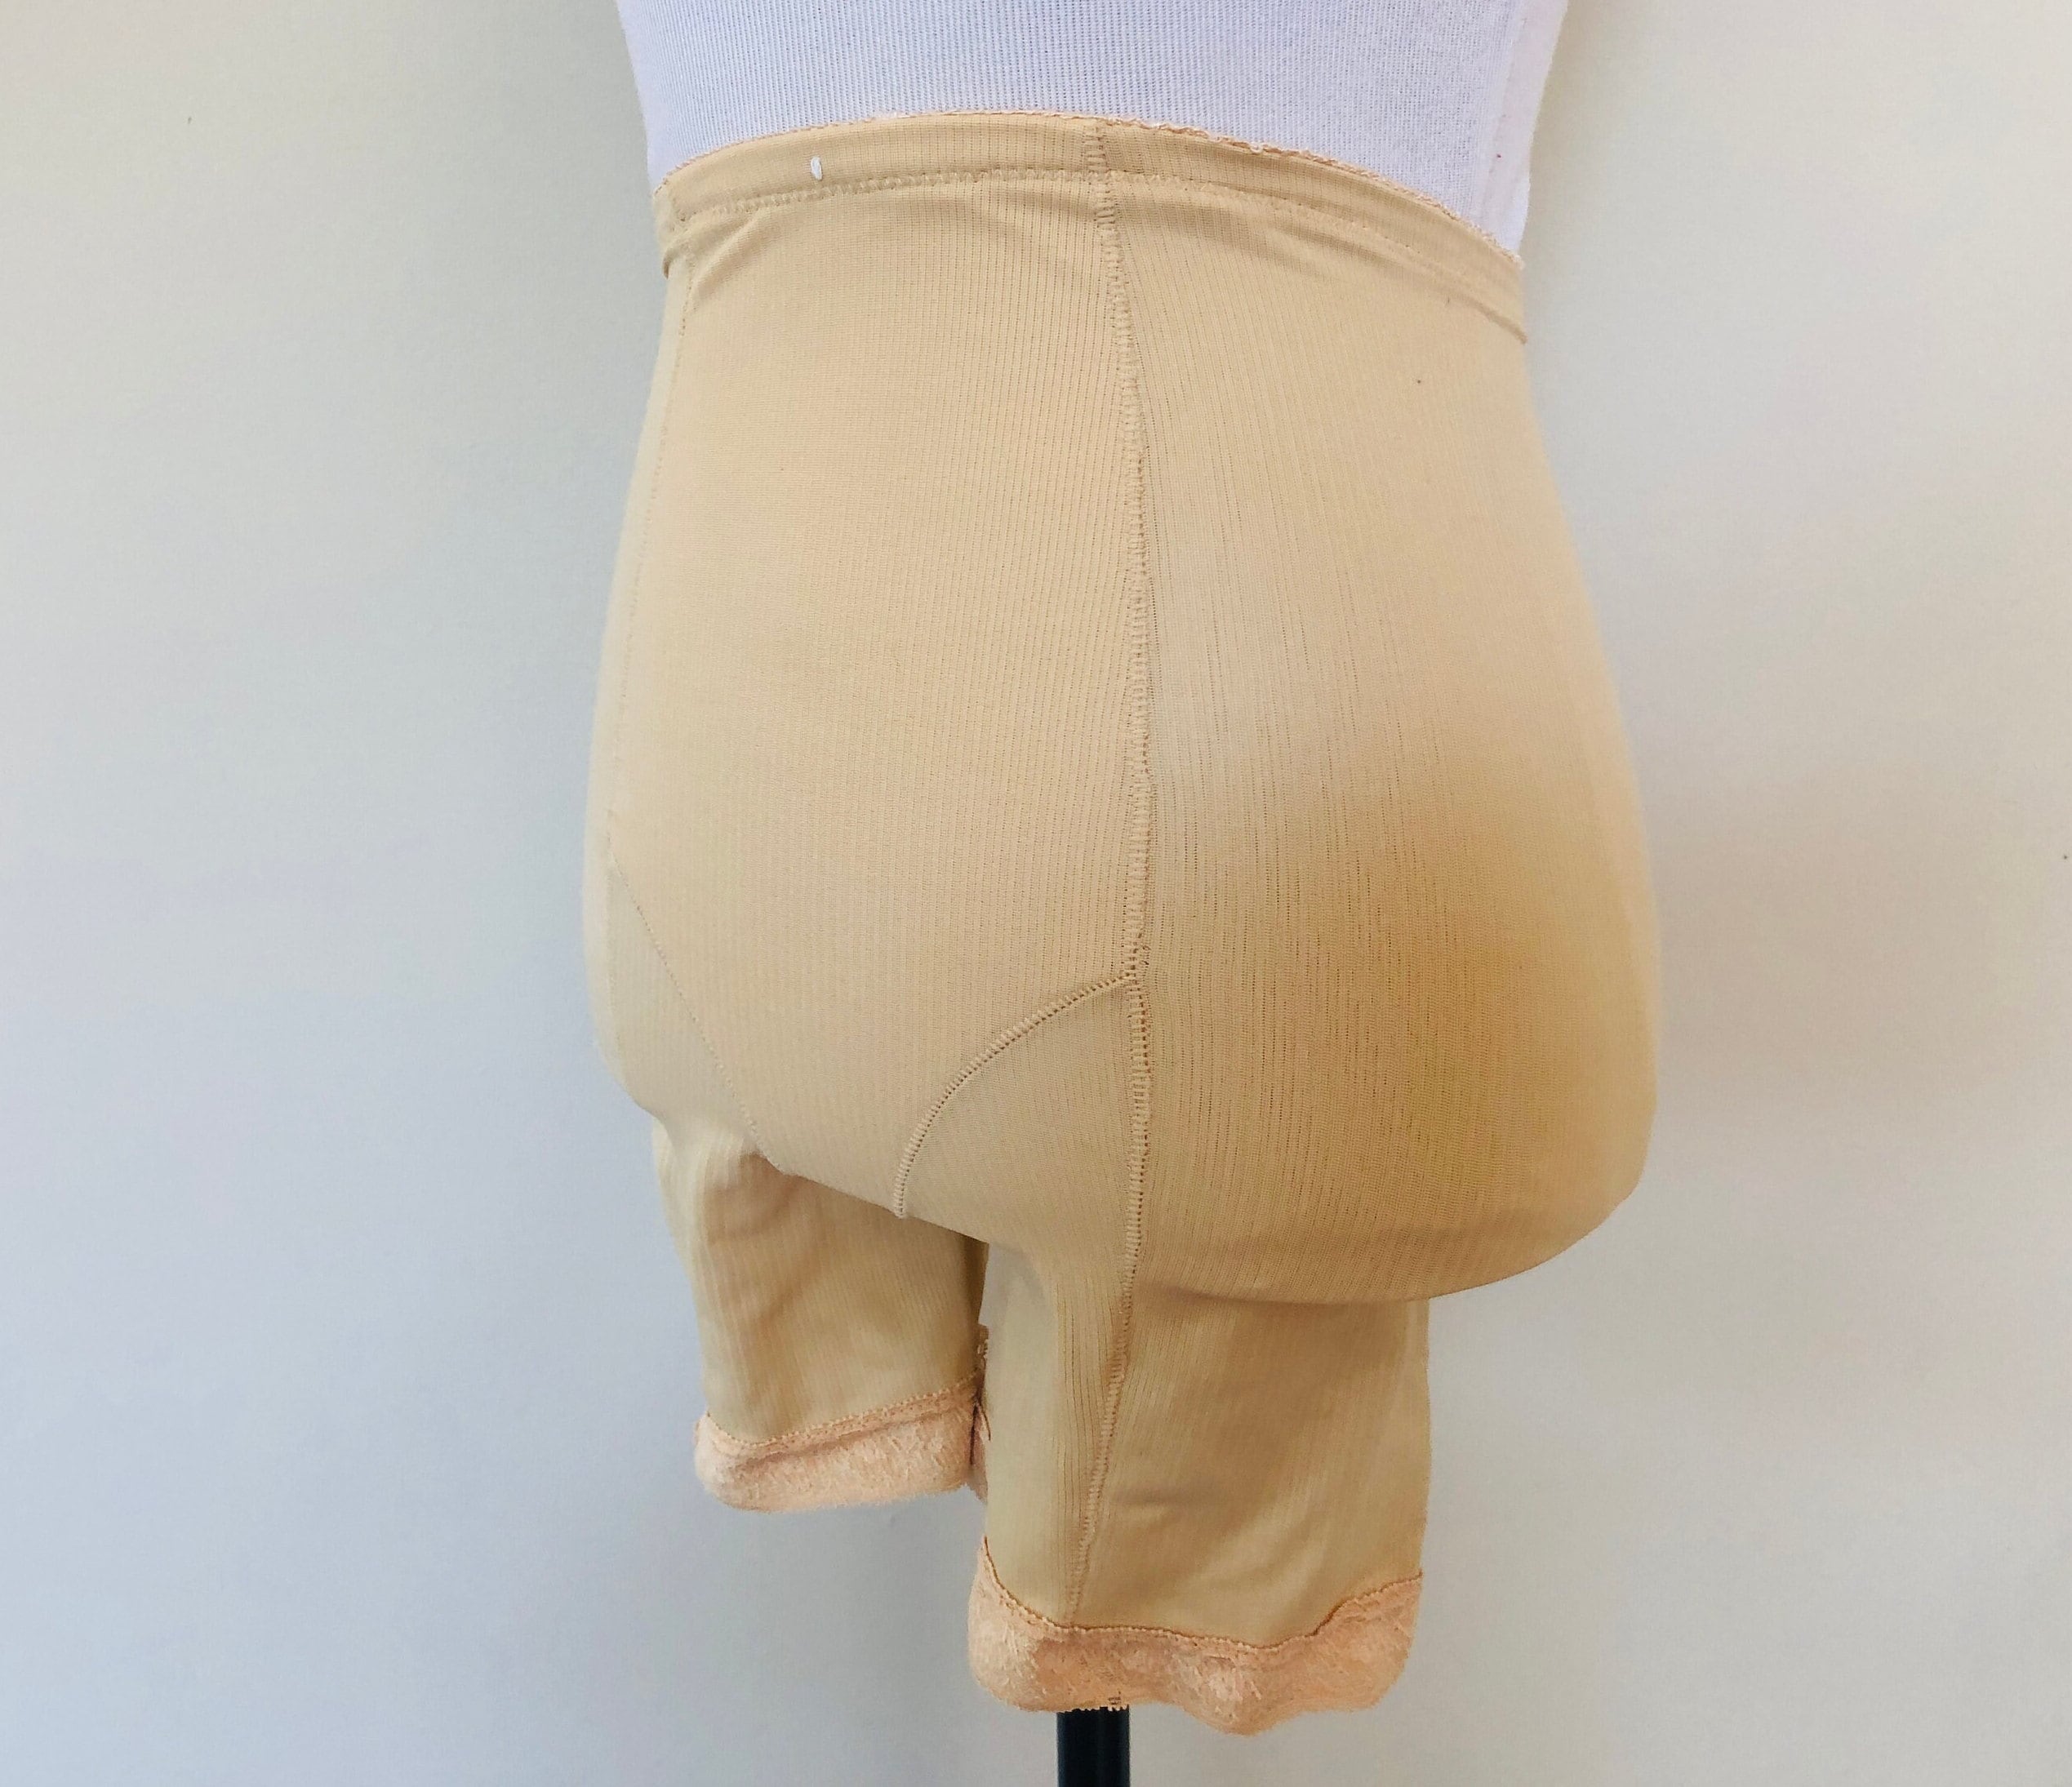 Panty Girdle Small Rago NWOT Nude Tight Made in USA Pinup High Waist Full  Bottom Tan Beige Vintage Lingerie 